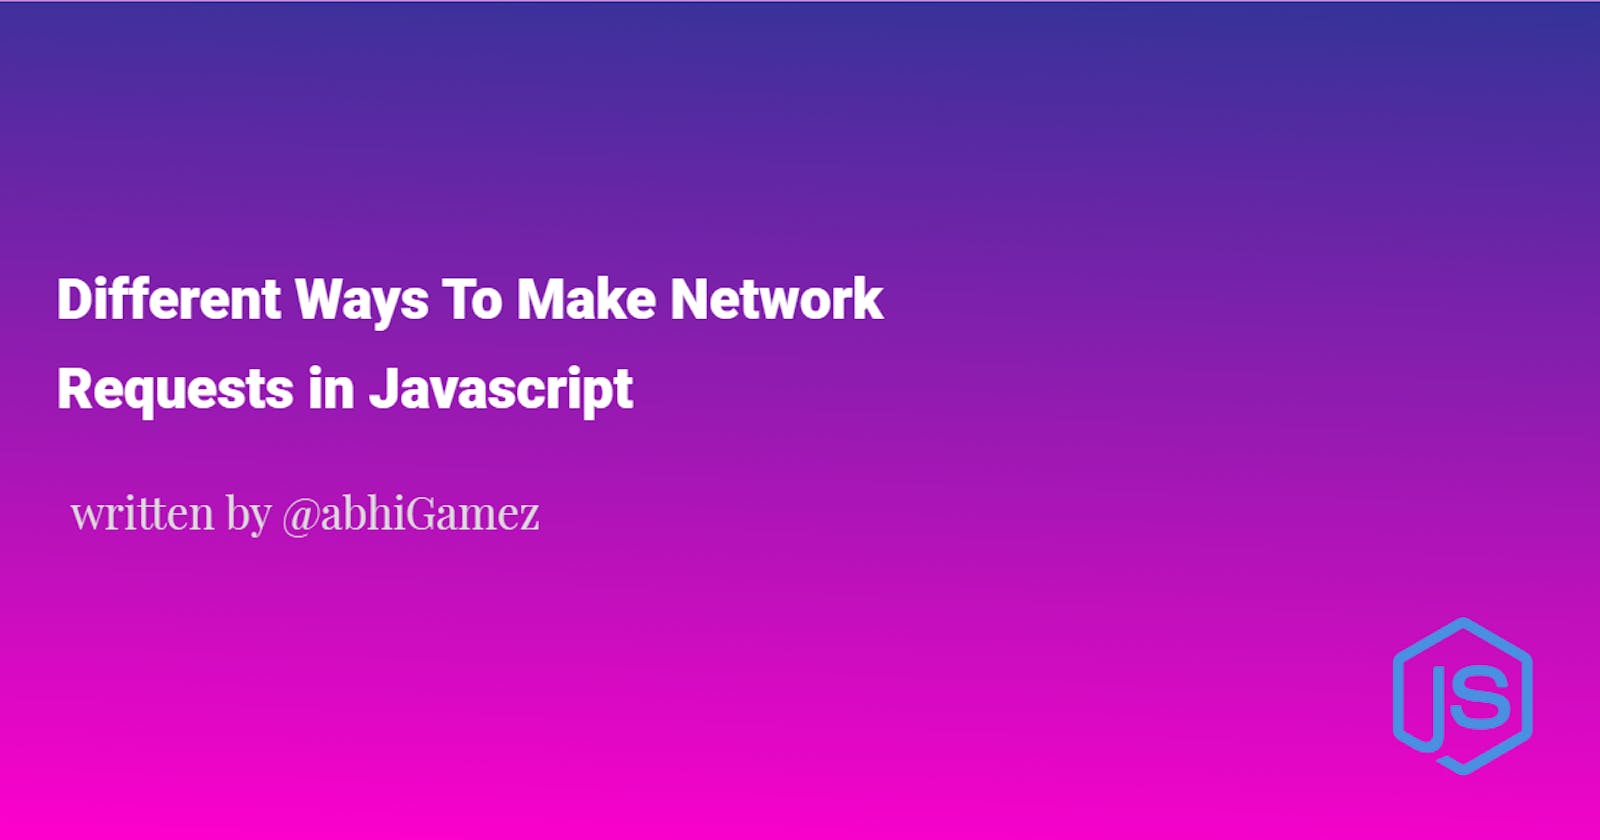 Different Ways To Make Network Requests in Javascript